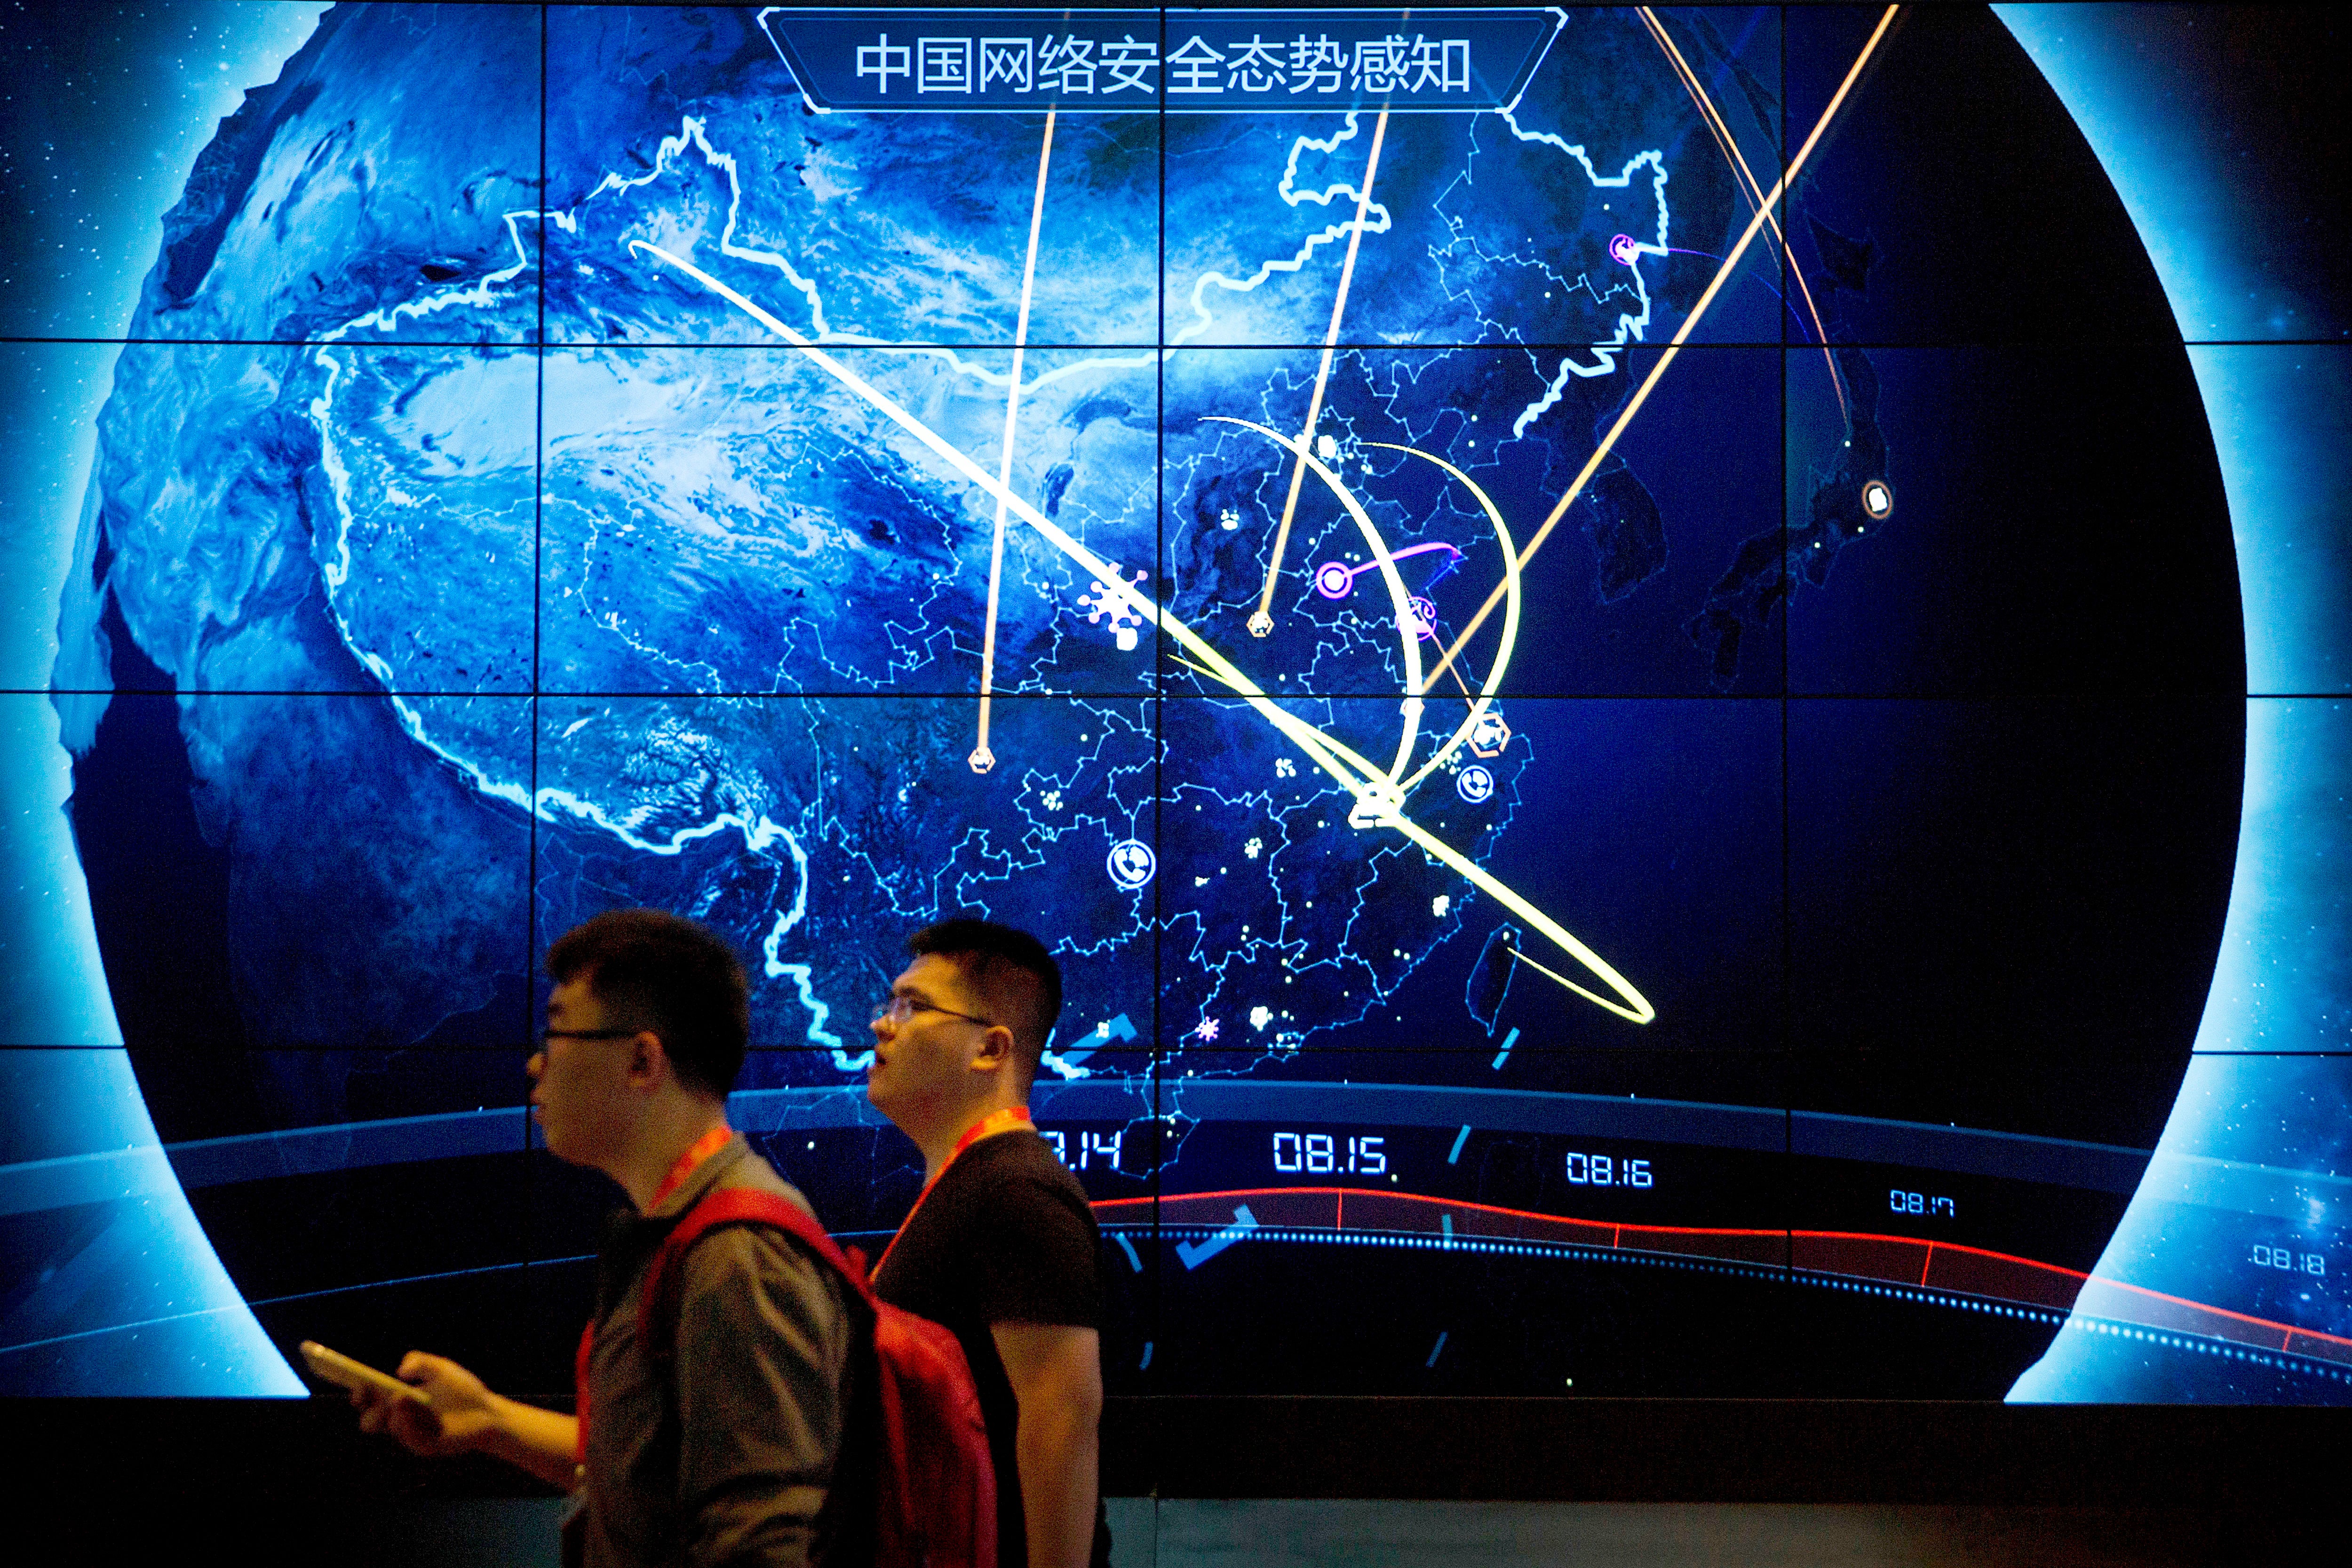 Attendees at a Chinese internet safety conference walk past an electronic display showing recent cyberattacks in China